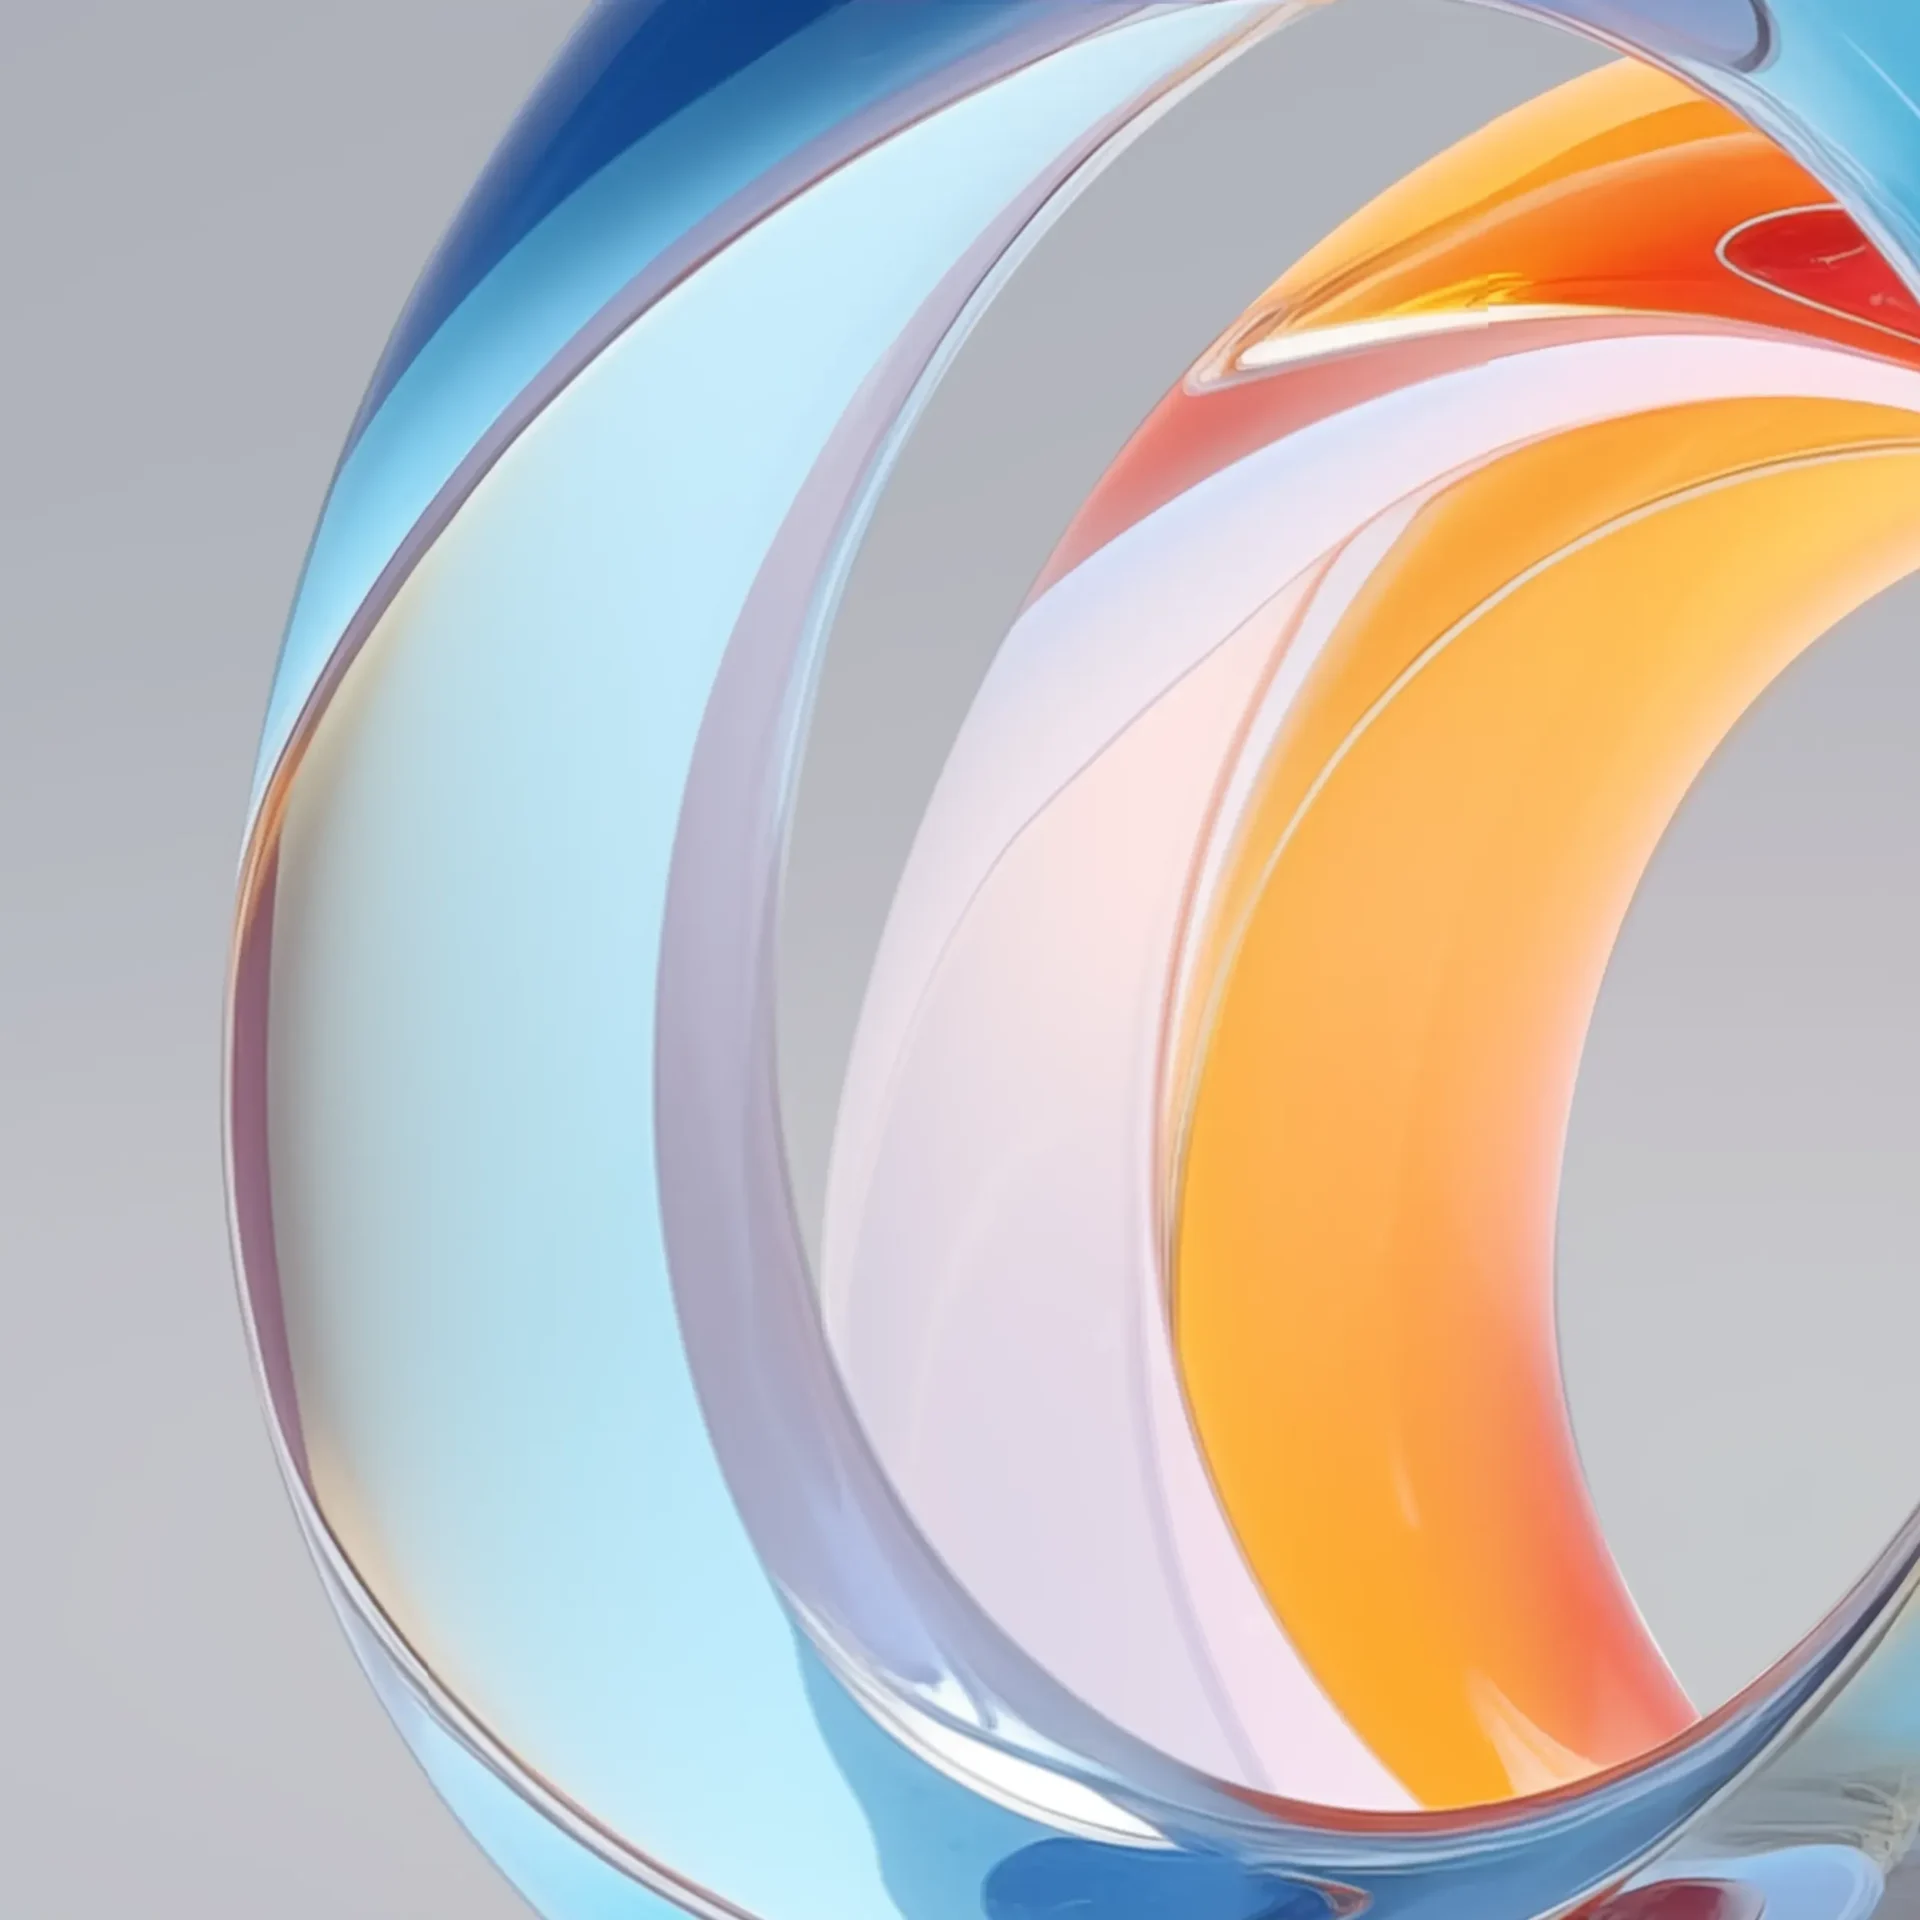 Abstract swirl with reflective surfaces in blue and orange hues, enhanced by triple ring technologies.